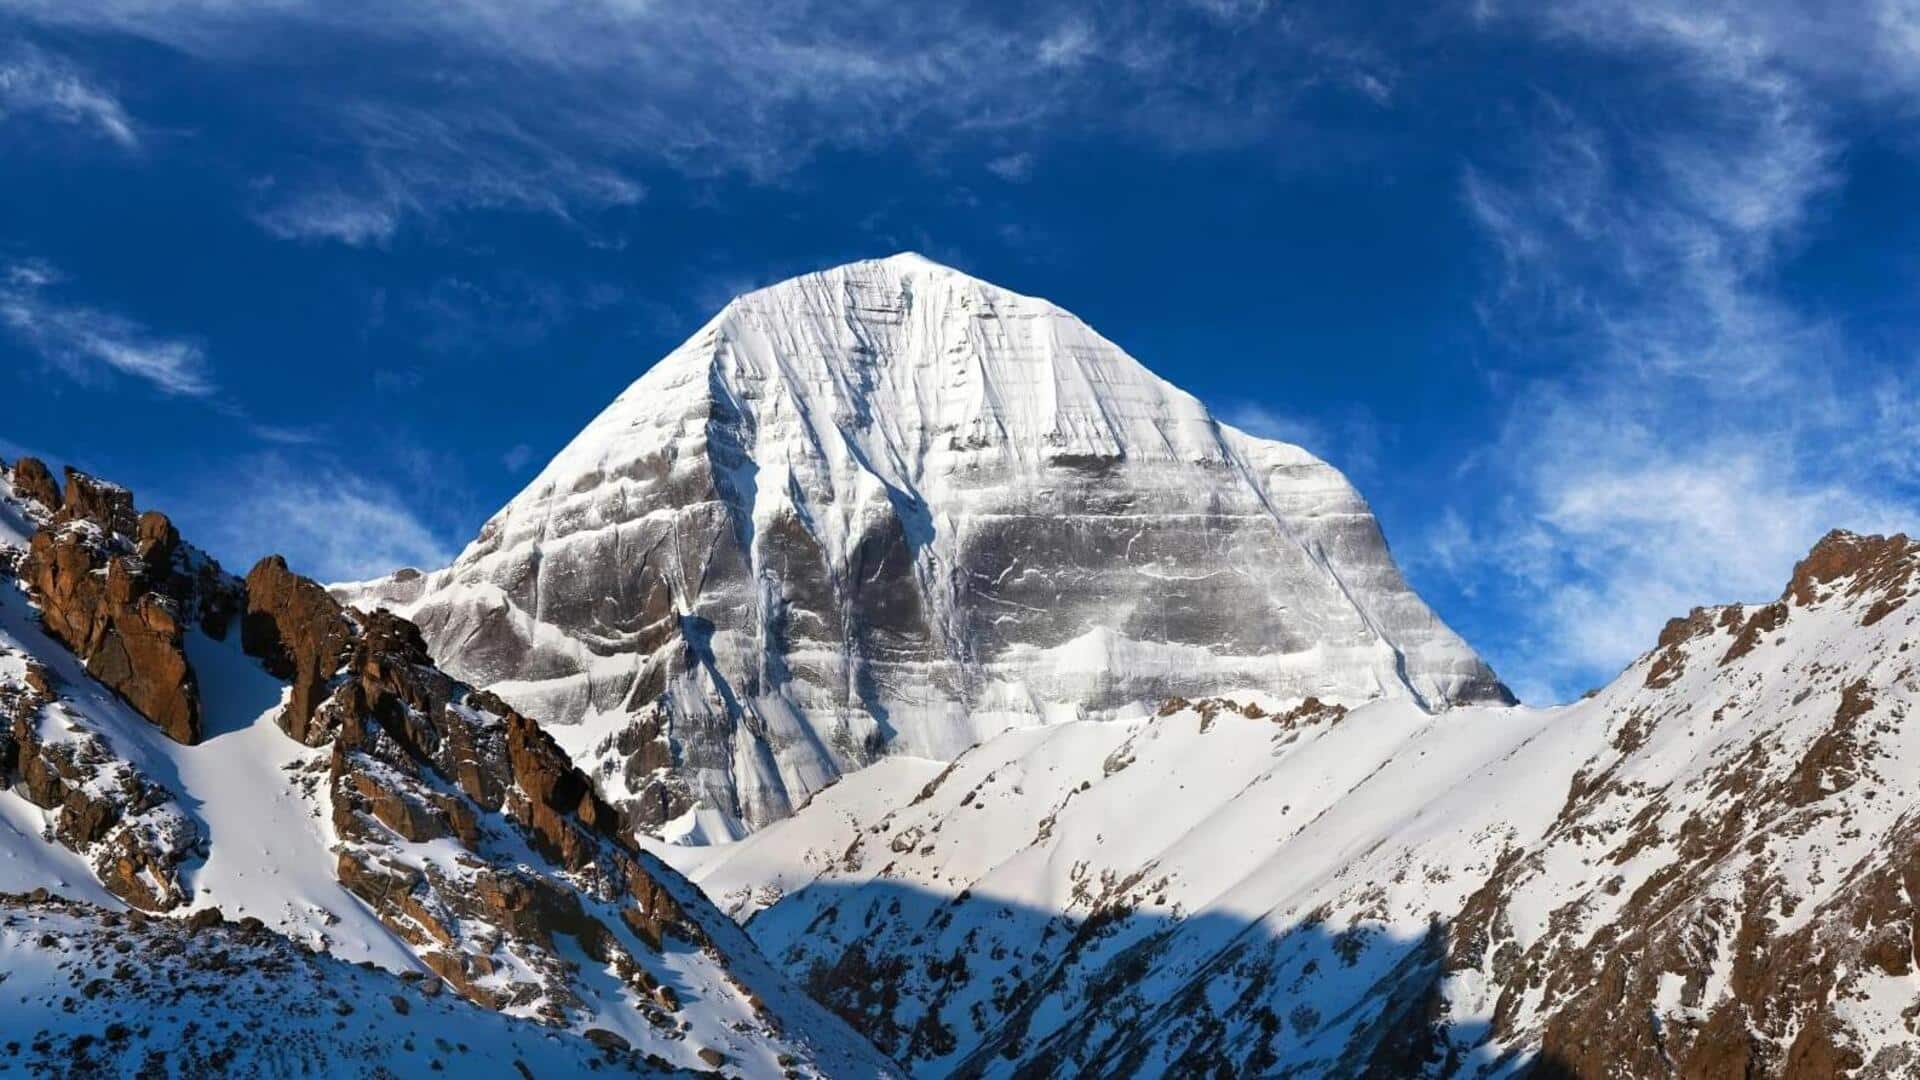 Embark on a spiritual quest to Mount Kailash, Tibet